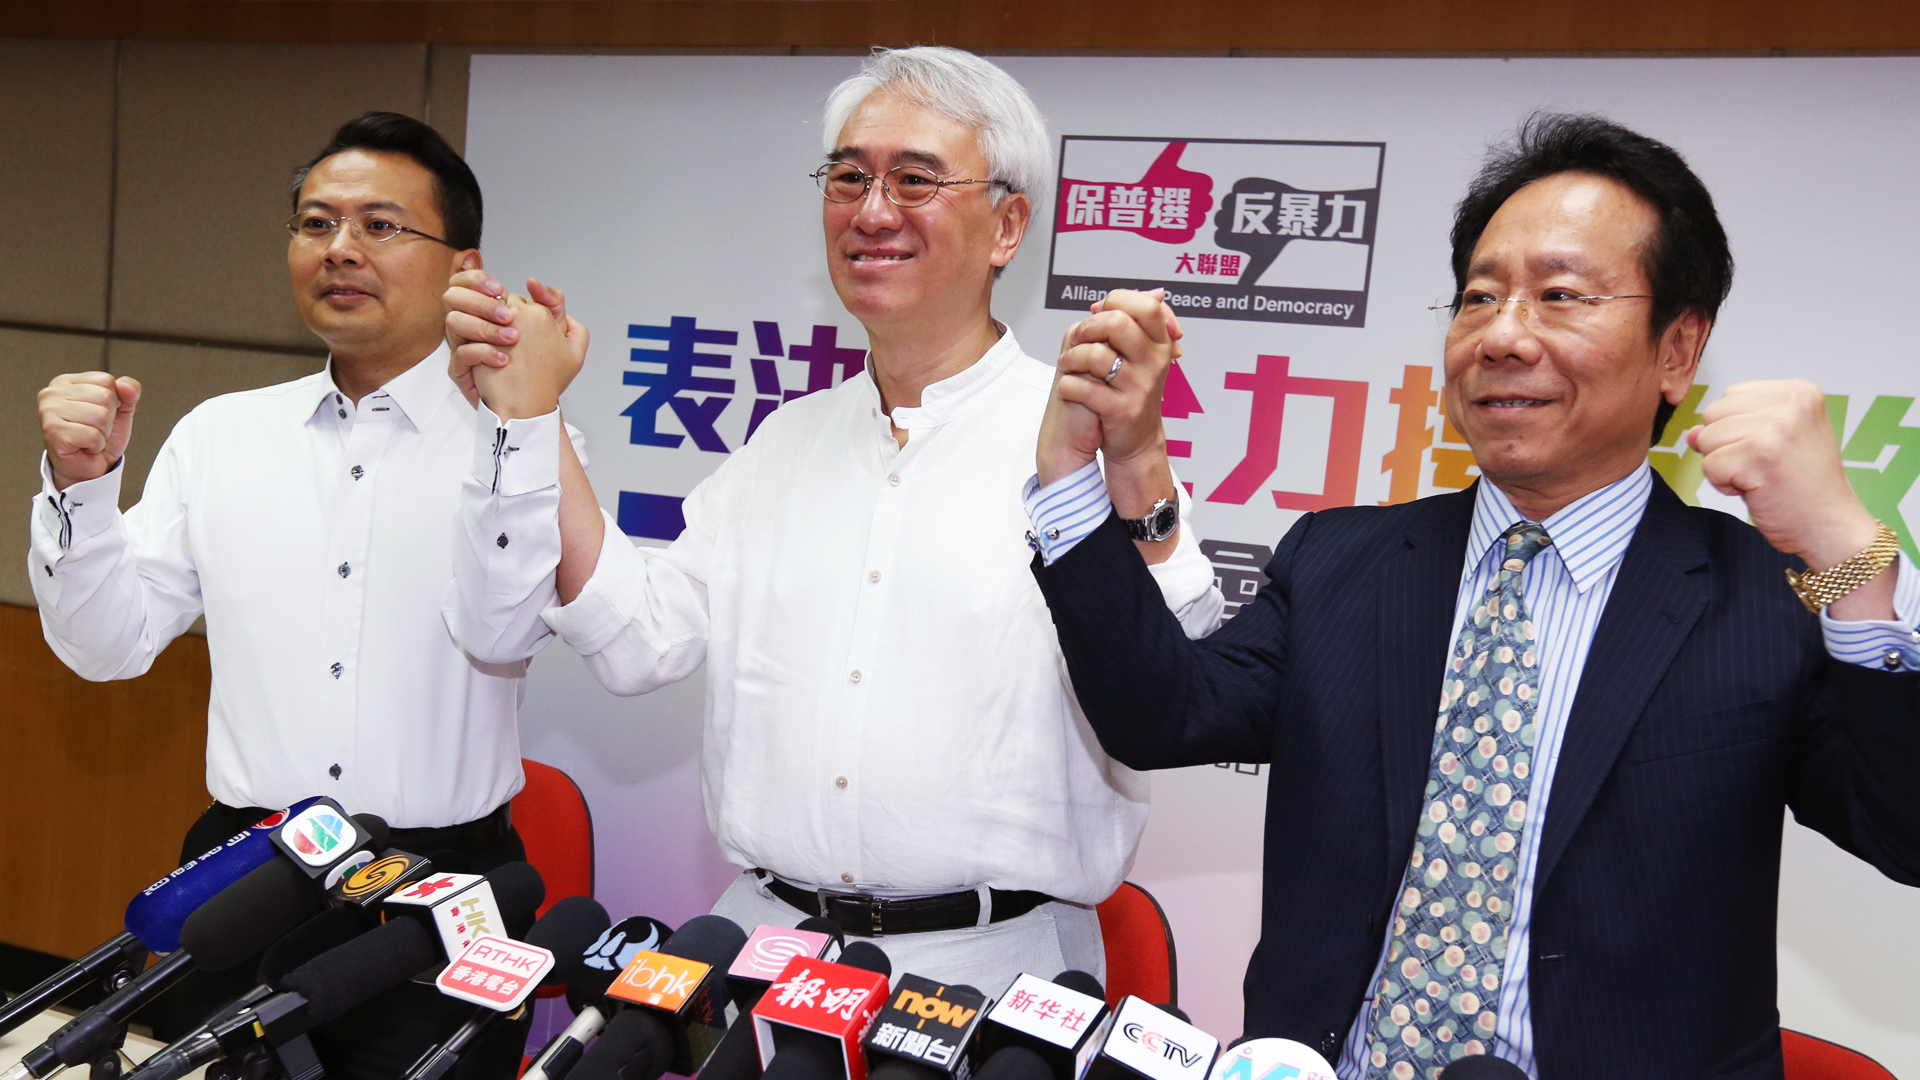 From left to right, Brave Chan Yung, Robert Chow Yung and Barry Chin Chi-yung hold press conference on its action to support and secure the Legco passage of constitutional reform package. Photo: Nora Tam